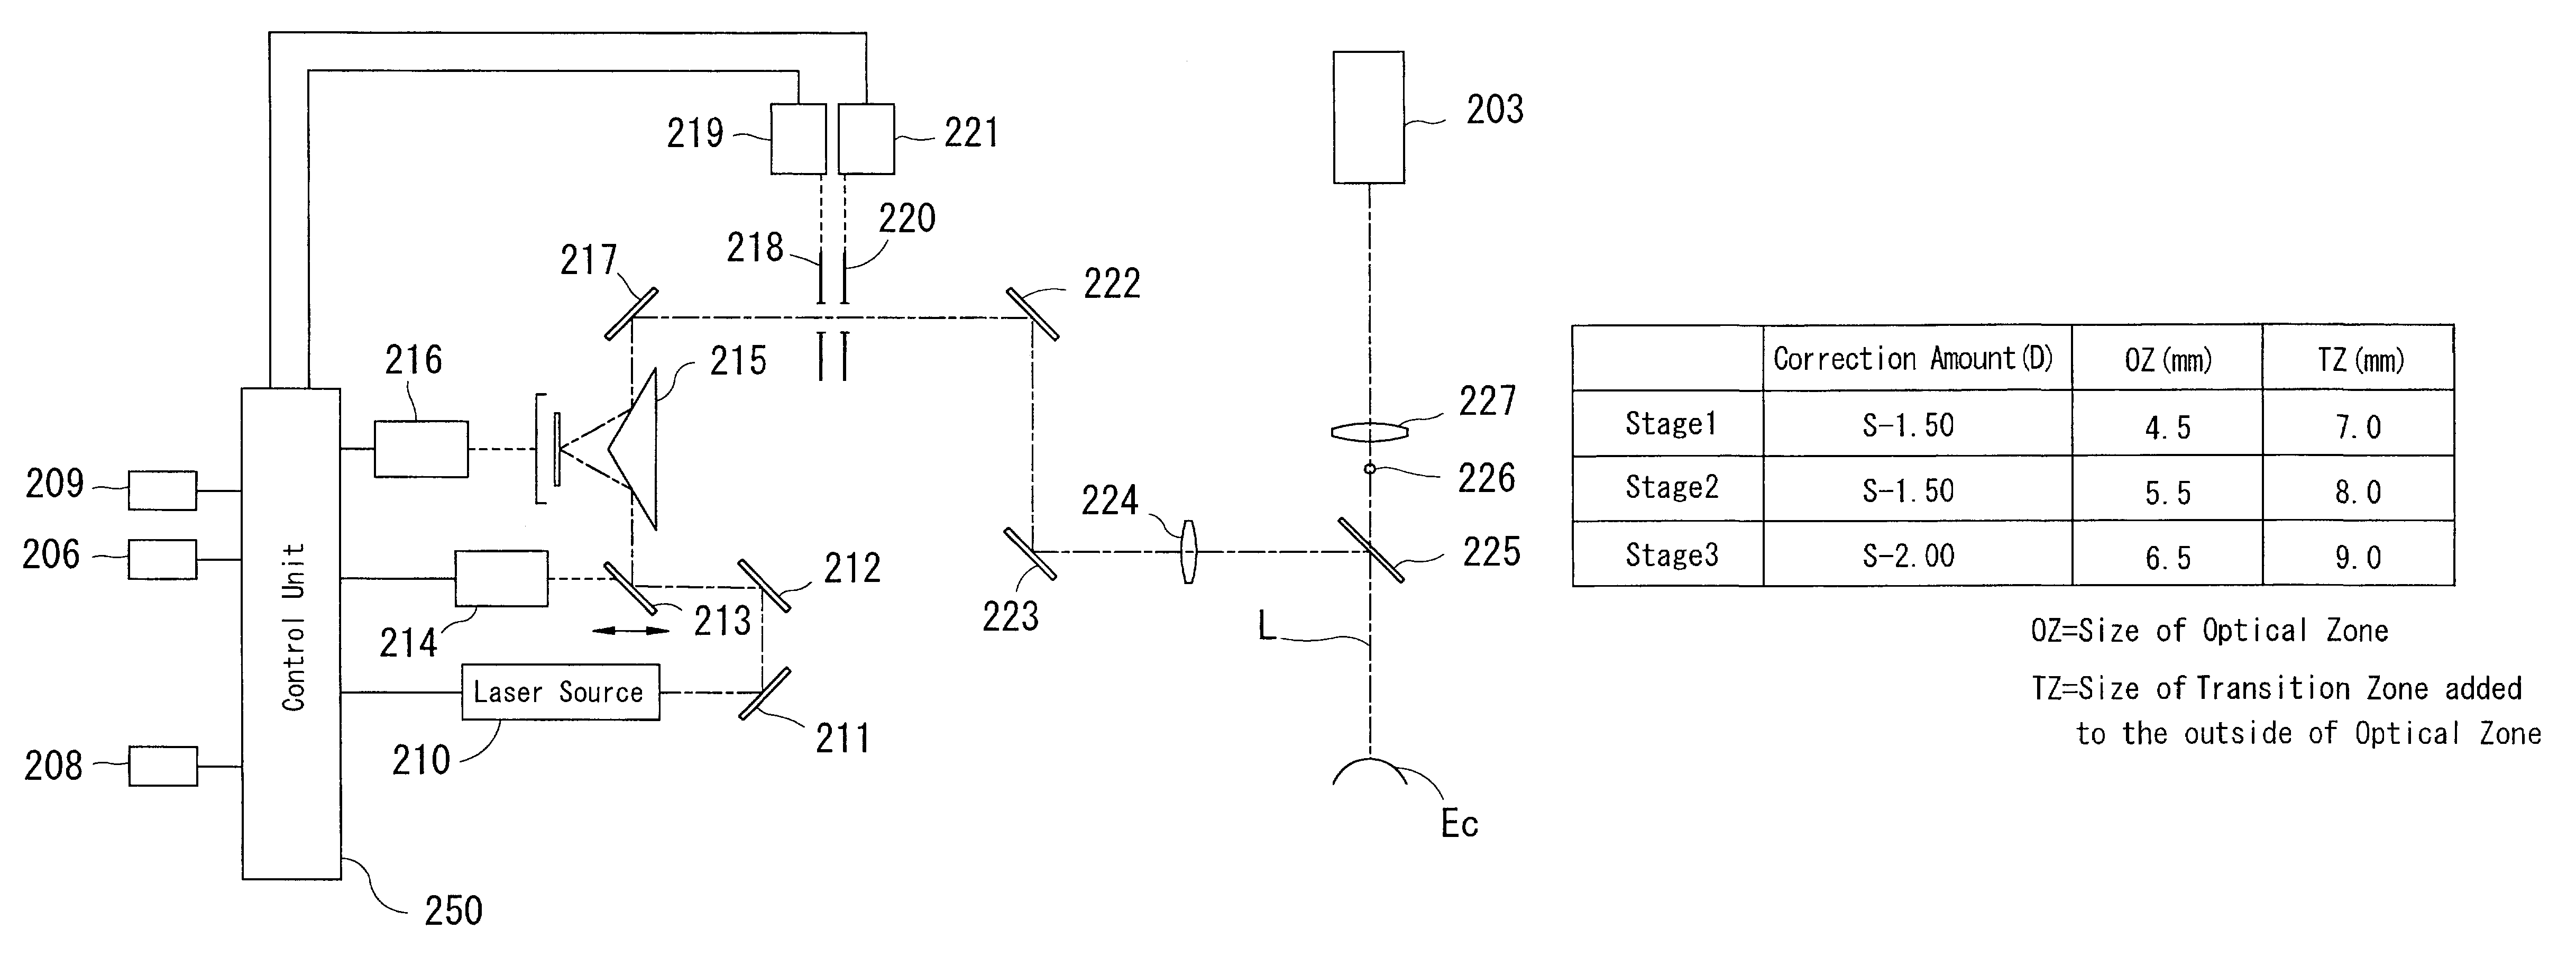 Corneal-ablation-amount determining apparatus and a corneal surgery apparatus